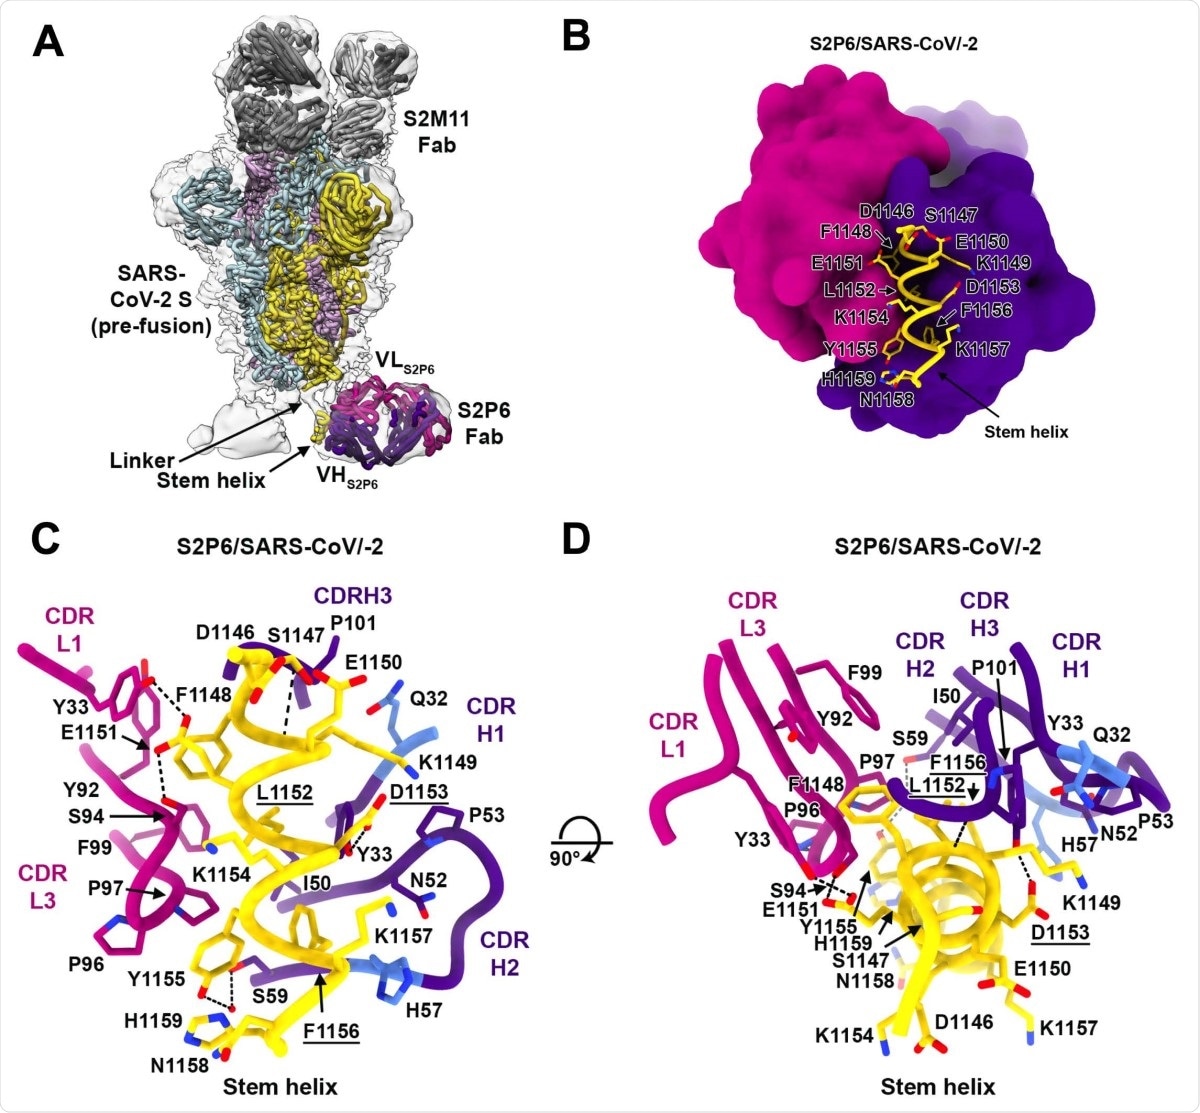 Structural basis for the broad S2P6 cross-reactivity with a conserved coronavirus. stem helix peptide. (A) Composite model of the S2P6-bound SARS-CoV-2 S cryoEM structure and of the S2P6-bound stem helix peptide crystal structure docked in the cryoEM map (transparent gray surface). SARS-CoV-2 S protomers are colored pink, cyan and gold, the S2P6 Fab heavy and light chains are colored purple and magenta and the S2M11 Fab heavy and light chains are colored dark and light gray, respectively. (B) Ribbon diagram of the S2P6 Fab (surface rendering) in complex with the SARS-CoV-2 S stem helix peptide (yellow ribbon with side chains rendered as sticks and labeled). (C-D) Ribbon diagram in two orthogonal orientations of the S2P6 Fab bound to the SARS-CoV-2 S stem helix peptide showing a conserved network of interactions. Only key interface residues and the S2P6 CDR loops are shown for clarity. Residues Q32 and H57, that are mutated during affinity maturation of the S2P6 heavy chain, are colored blue. Hydrogen bonds are indicated with dashed lines. Residues substituted in the escape mutants isolated are underlined.